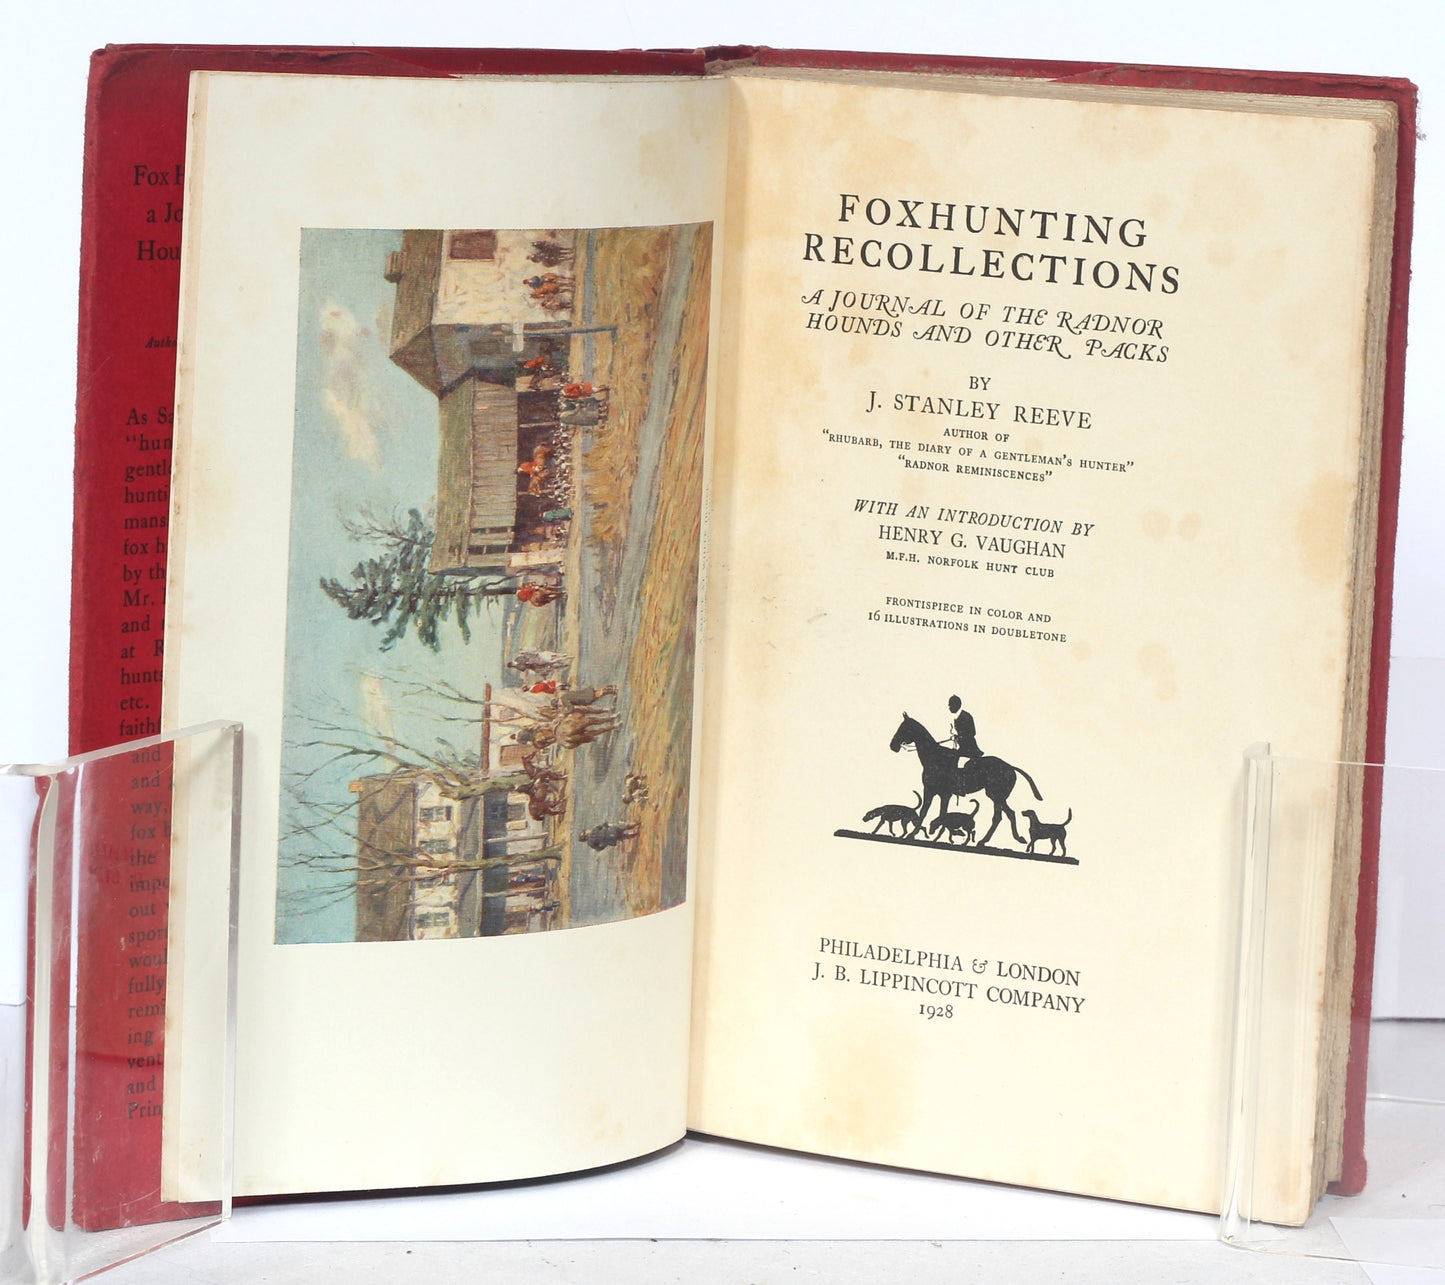 Foxhunting Recollections, A journal of the Radnor Hounds and Other Packs by J. stanley Reeve, 1st Ed. 1928